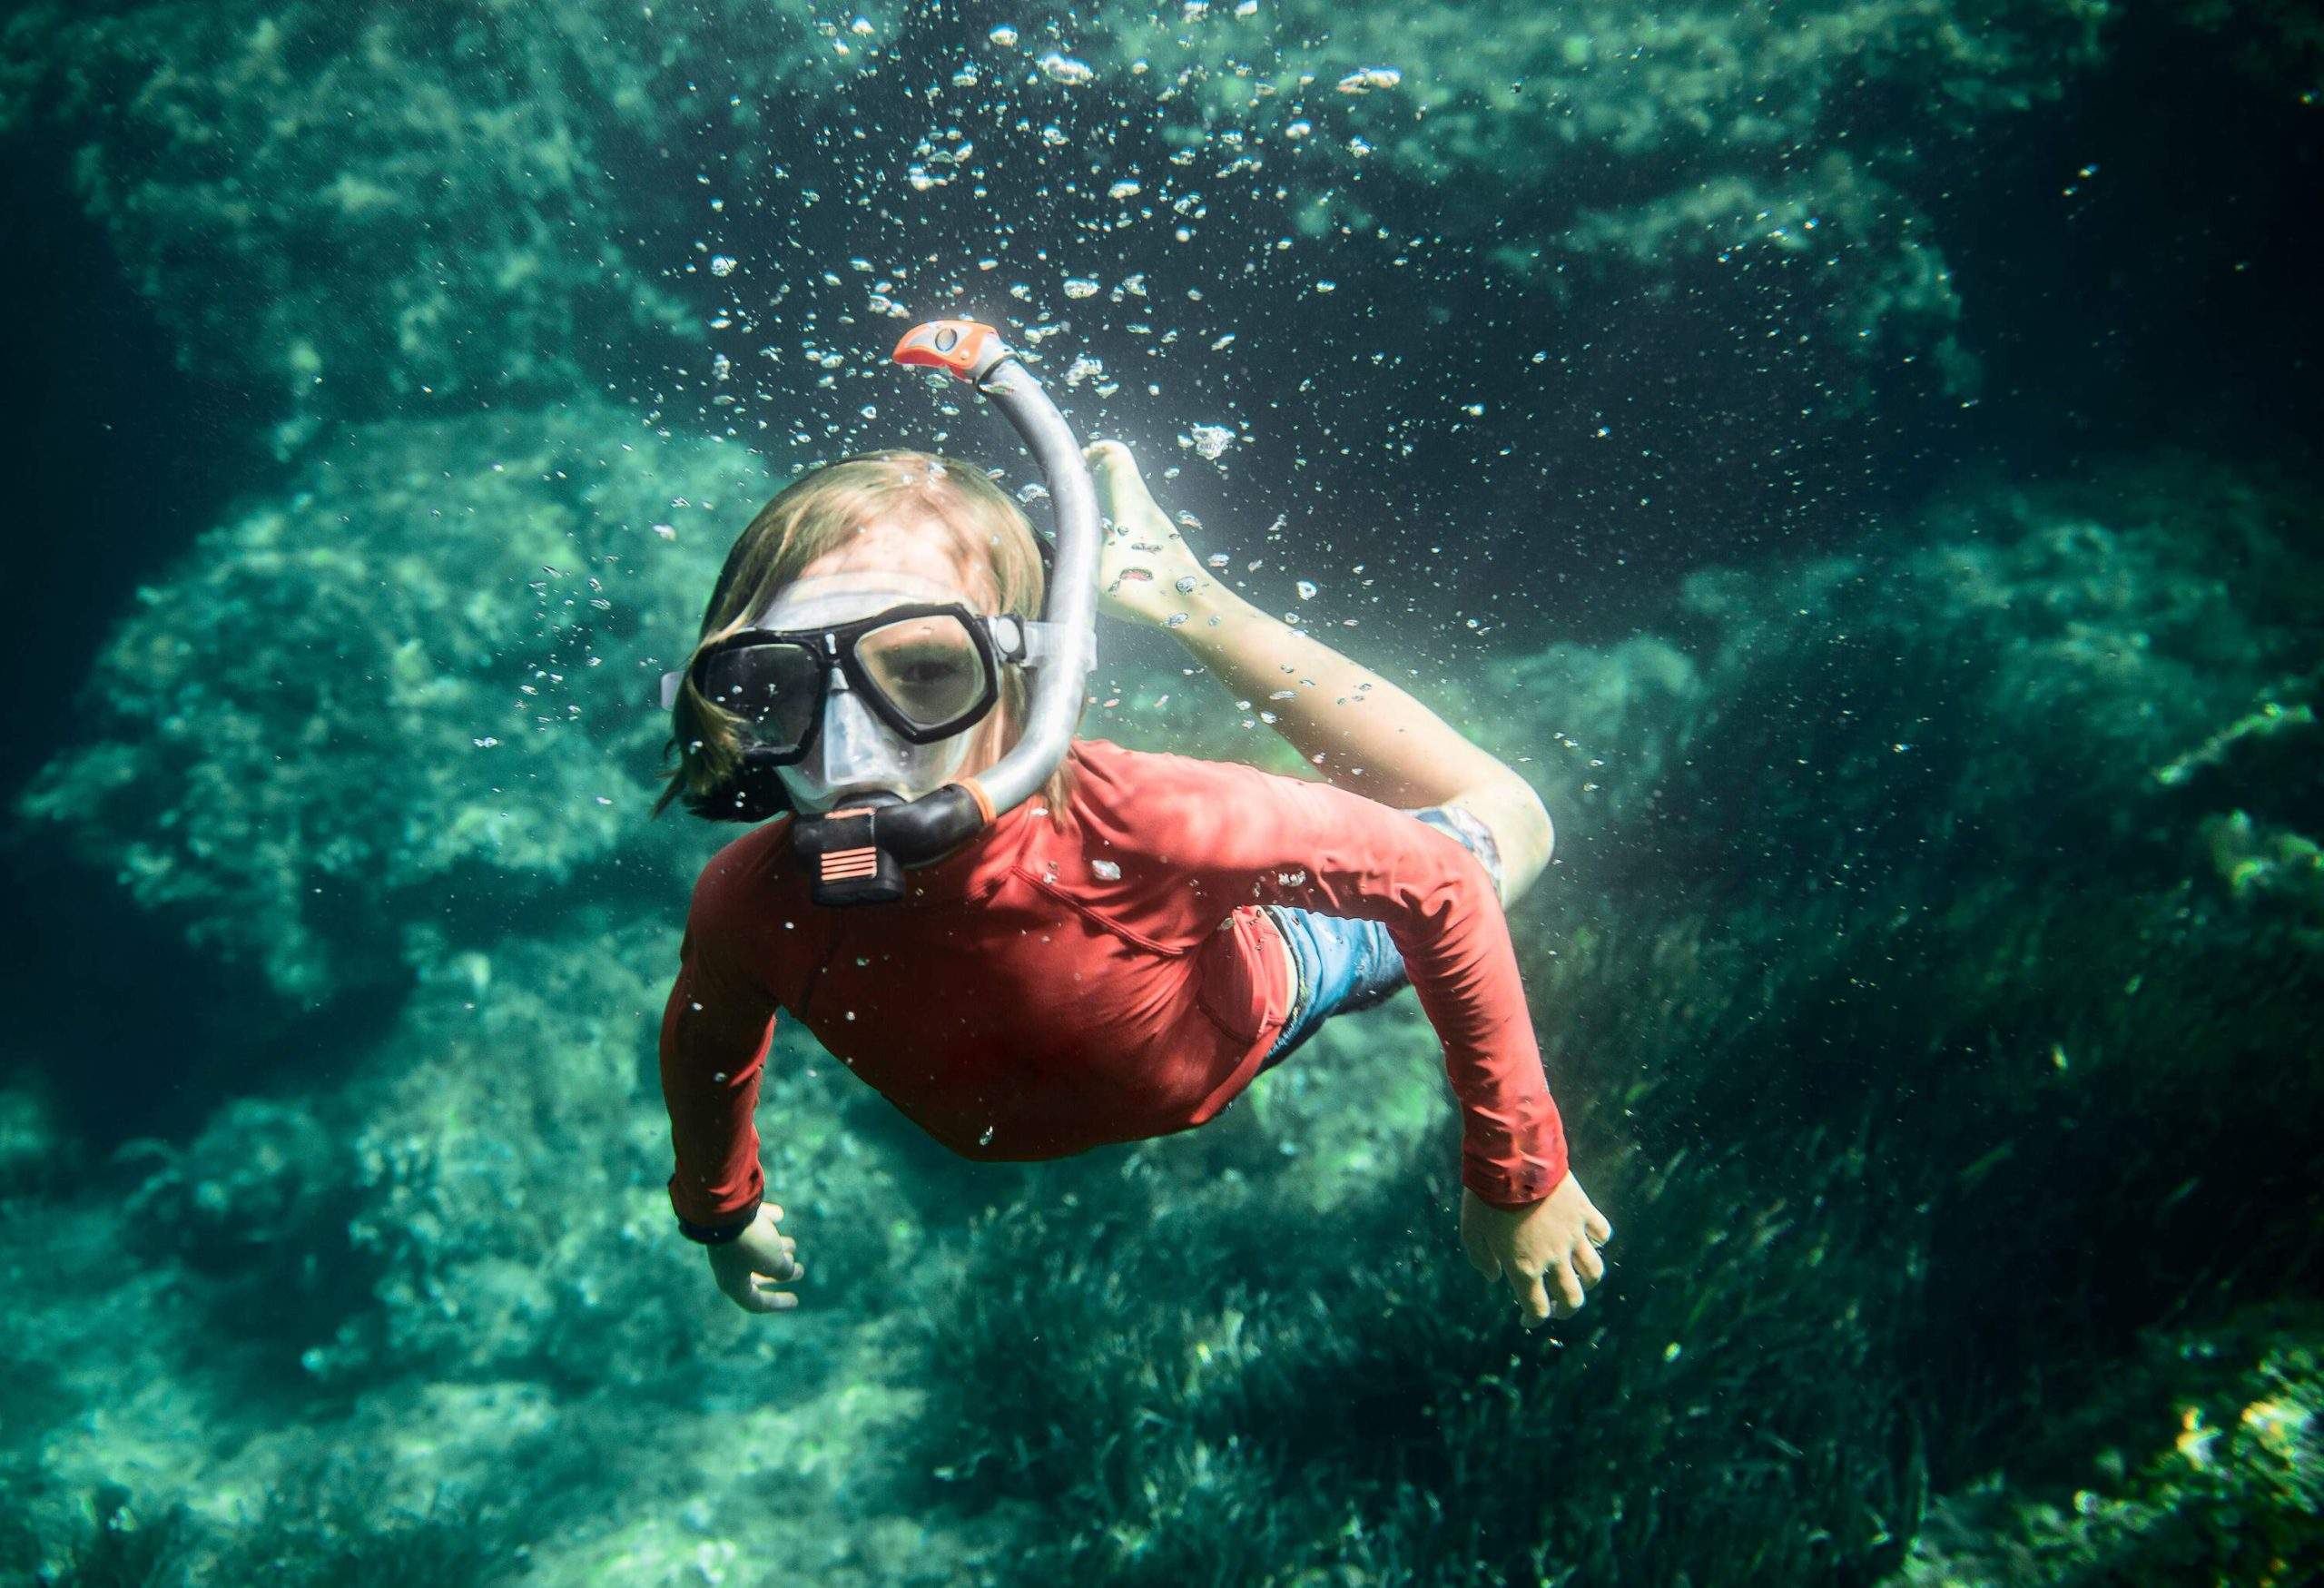 A kid in a red rash guard dives into the ocean wearing a snorkelling gear.